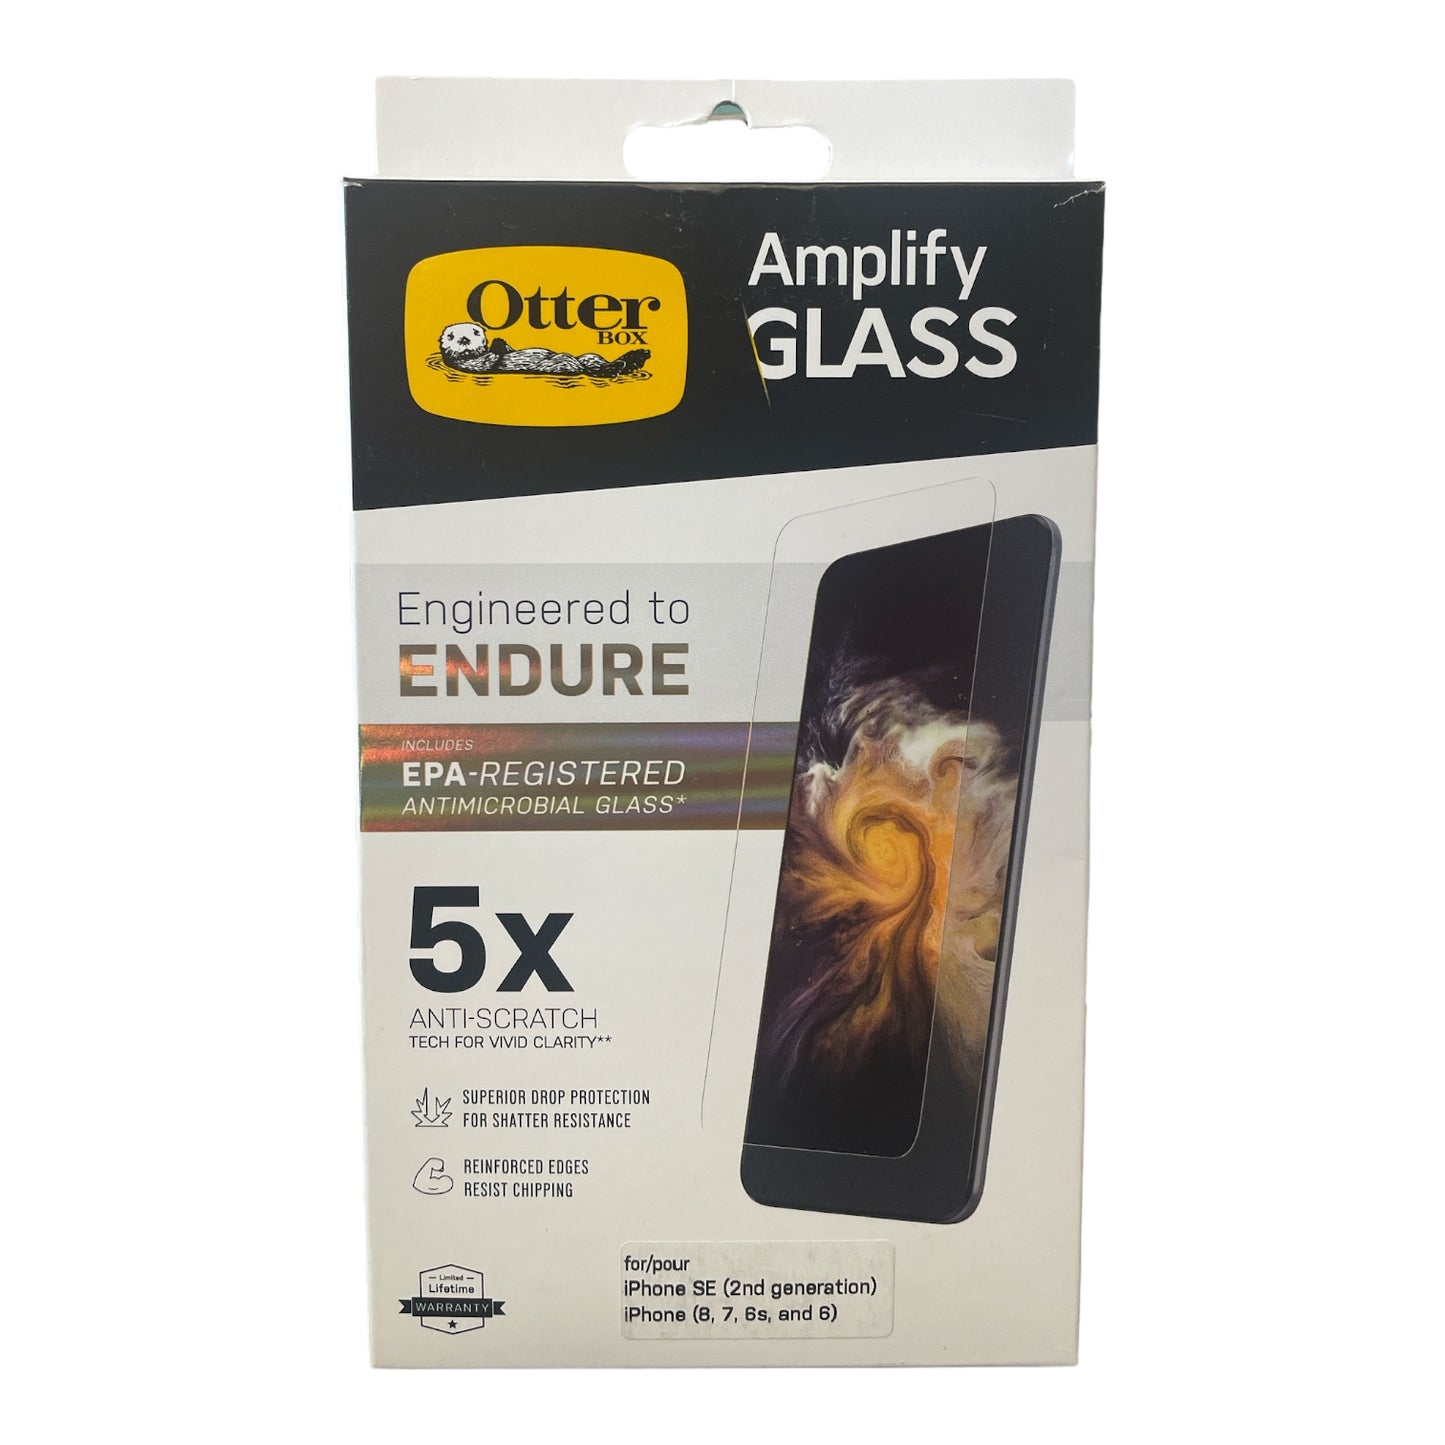 OtterBox Amplify Glass Anti-Scratch for iPhone 6, 6S, 7, 8, SE 2nd Gen (Clear)